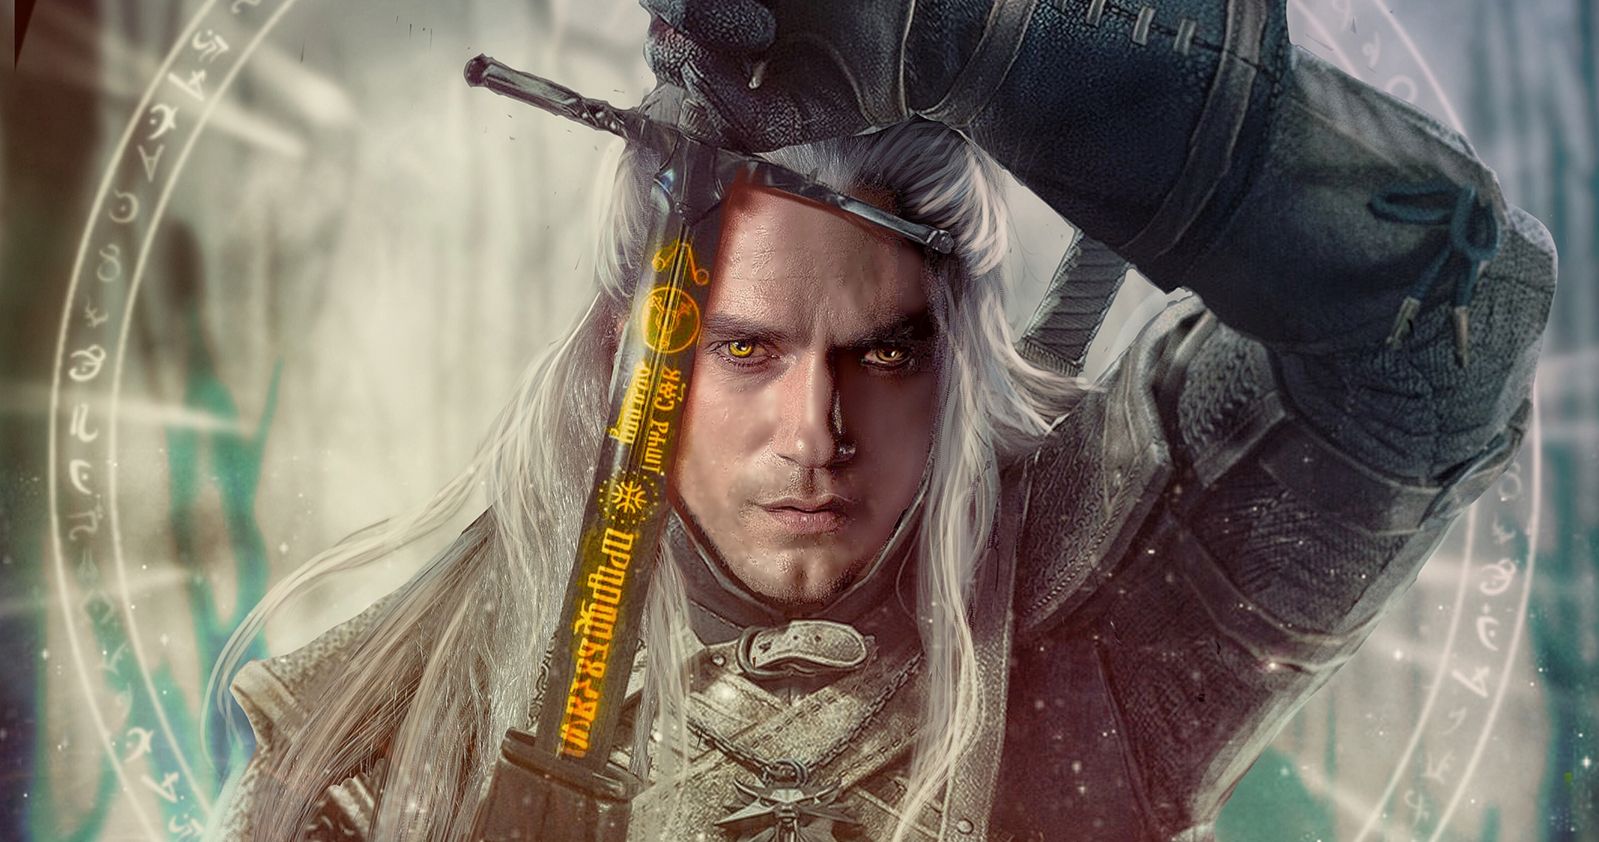 The Witcher Season 2 Showrunner Teases Fun, Energized New Episodes About Family